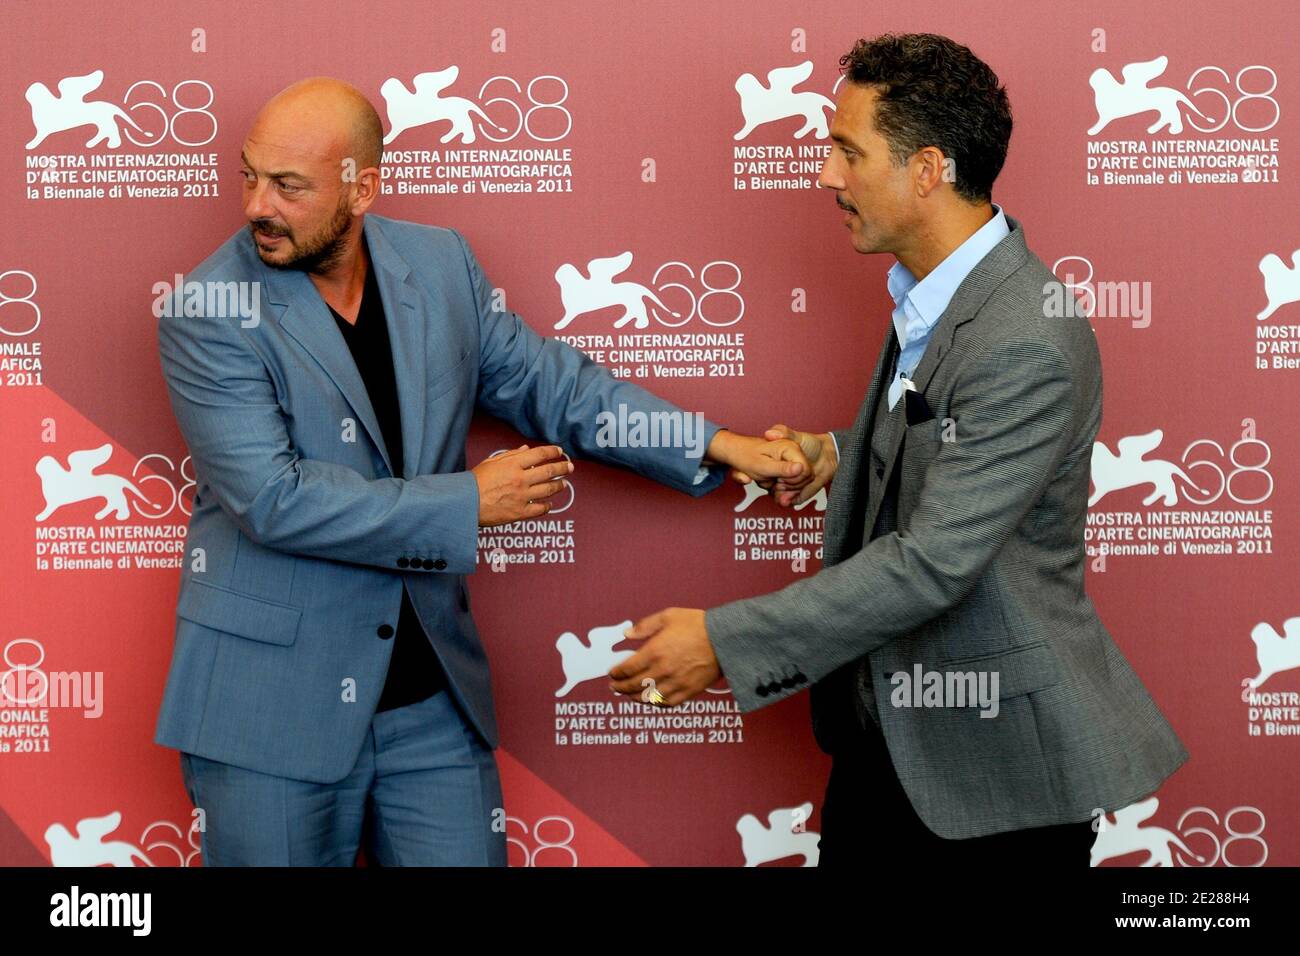 Giuseppe Fiorello and Emanuele Crialese attending the photocall for 'Terraferma' during the 68th Venice International Film Festival, Mostra Internazionale d'Arte Cinematografica, at Palazzo del Casino in Venice, Italy on September 4, 2011. Photo by Aurore Marechal/ABACAPRESS.COM Stock Photo